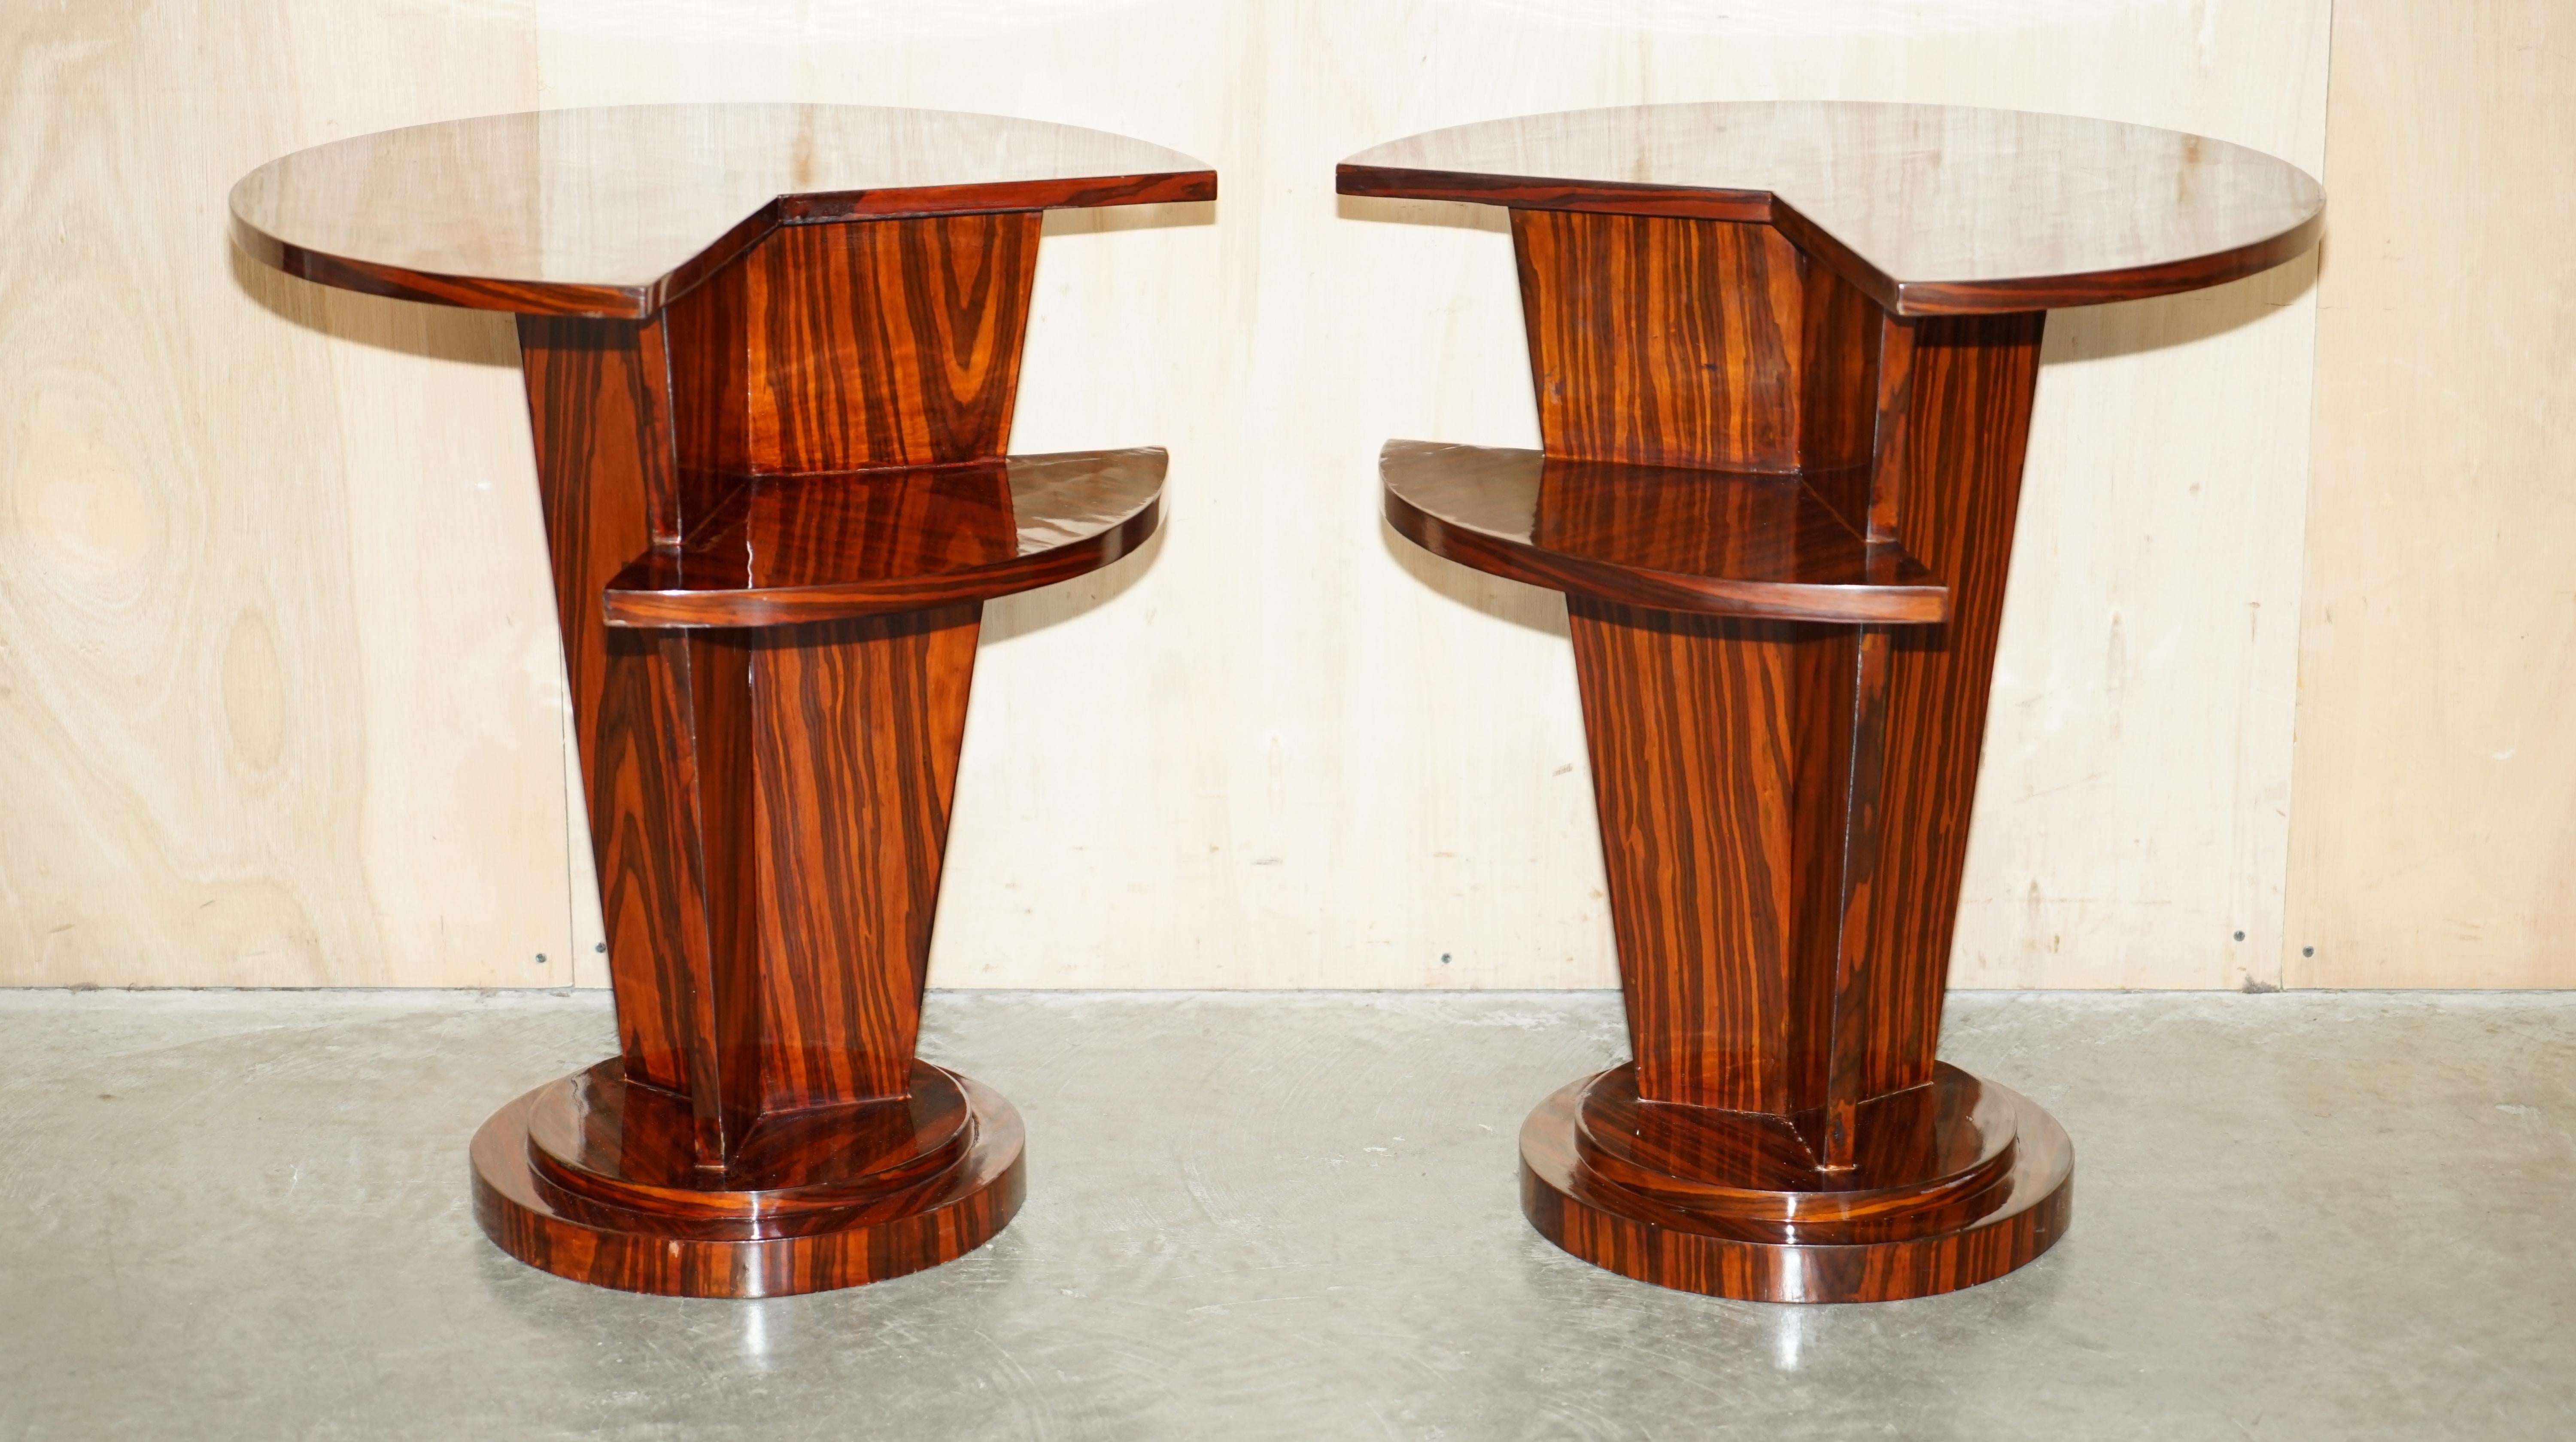 We are delighted to offer for sale this lovely pair of vintage Art Deco style Macassar two tier side end lamp wine tables 

A very good looking and highly decorative pair of side tables, they are two tier tables with a nice Macassar finish to